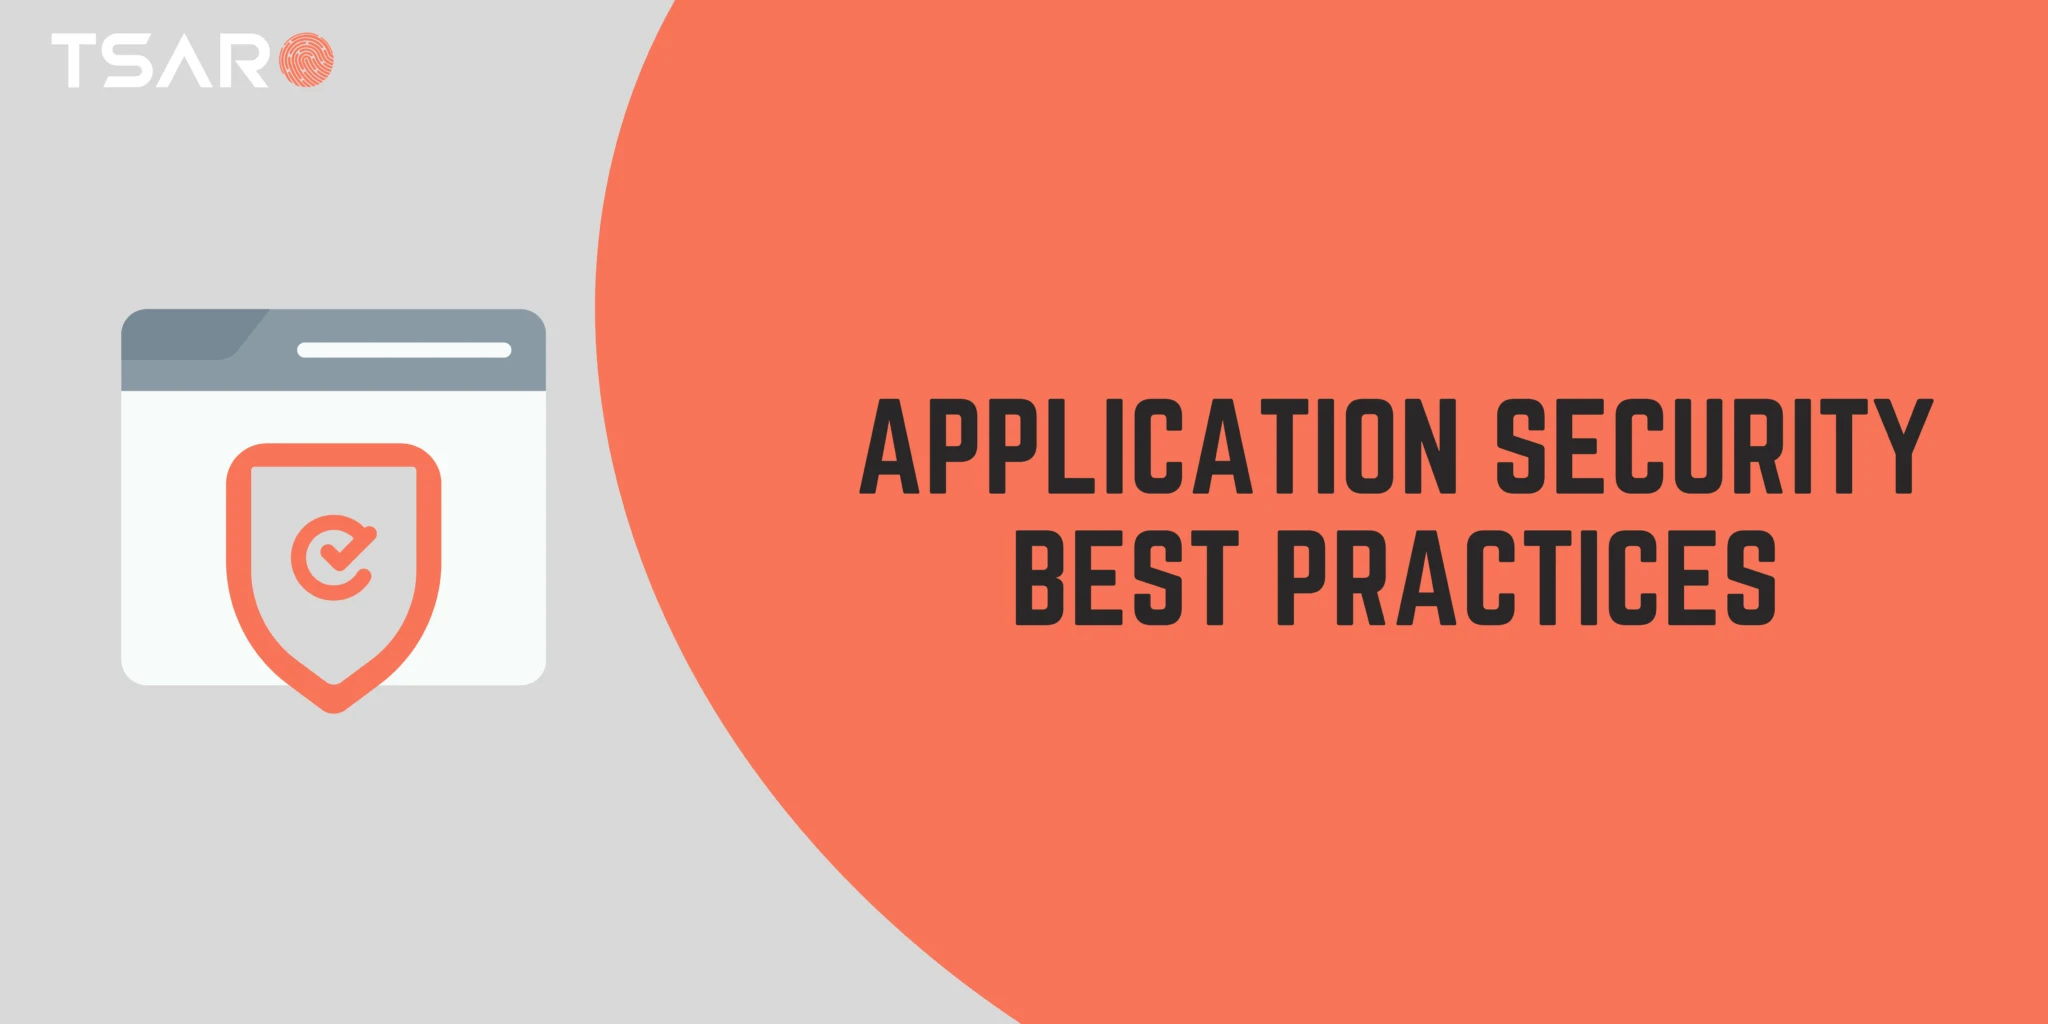 Application Security Best Practices – Key Steps to Follow